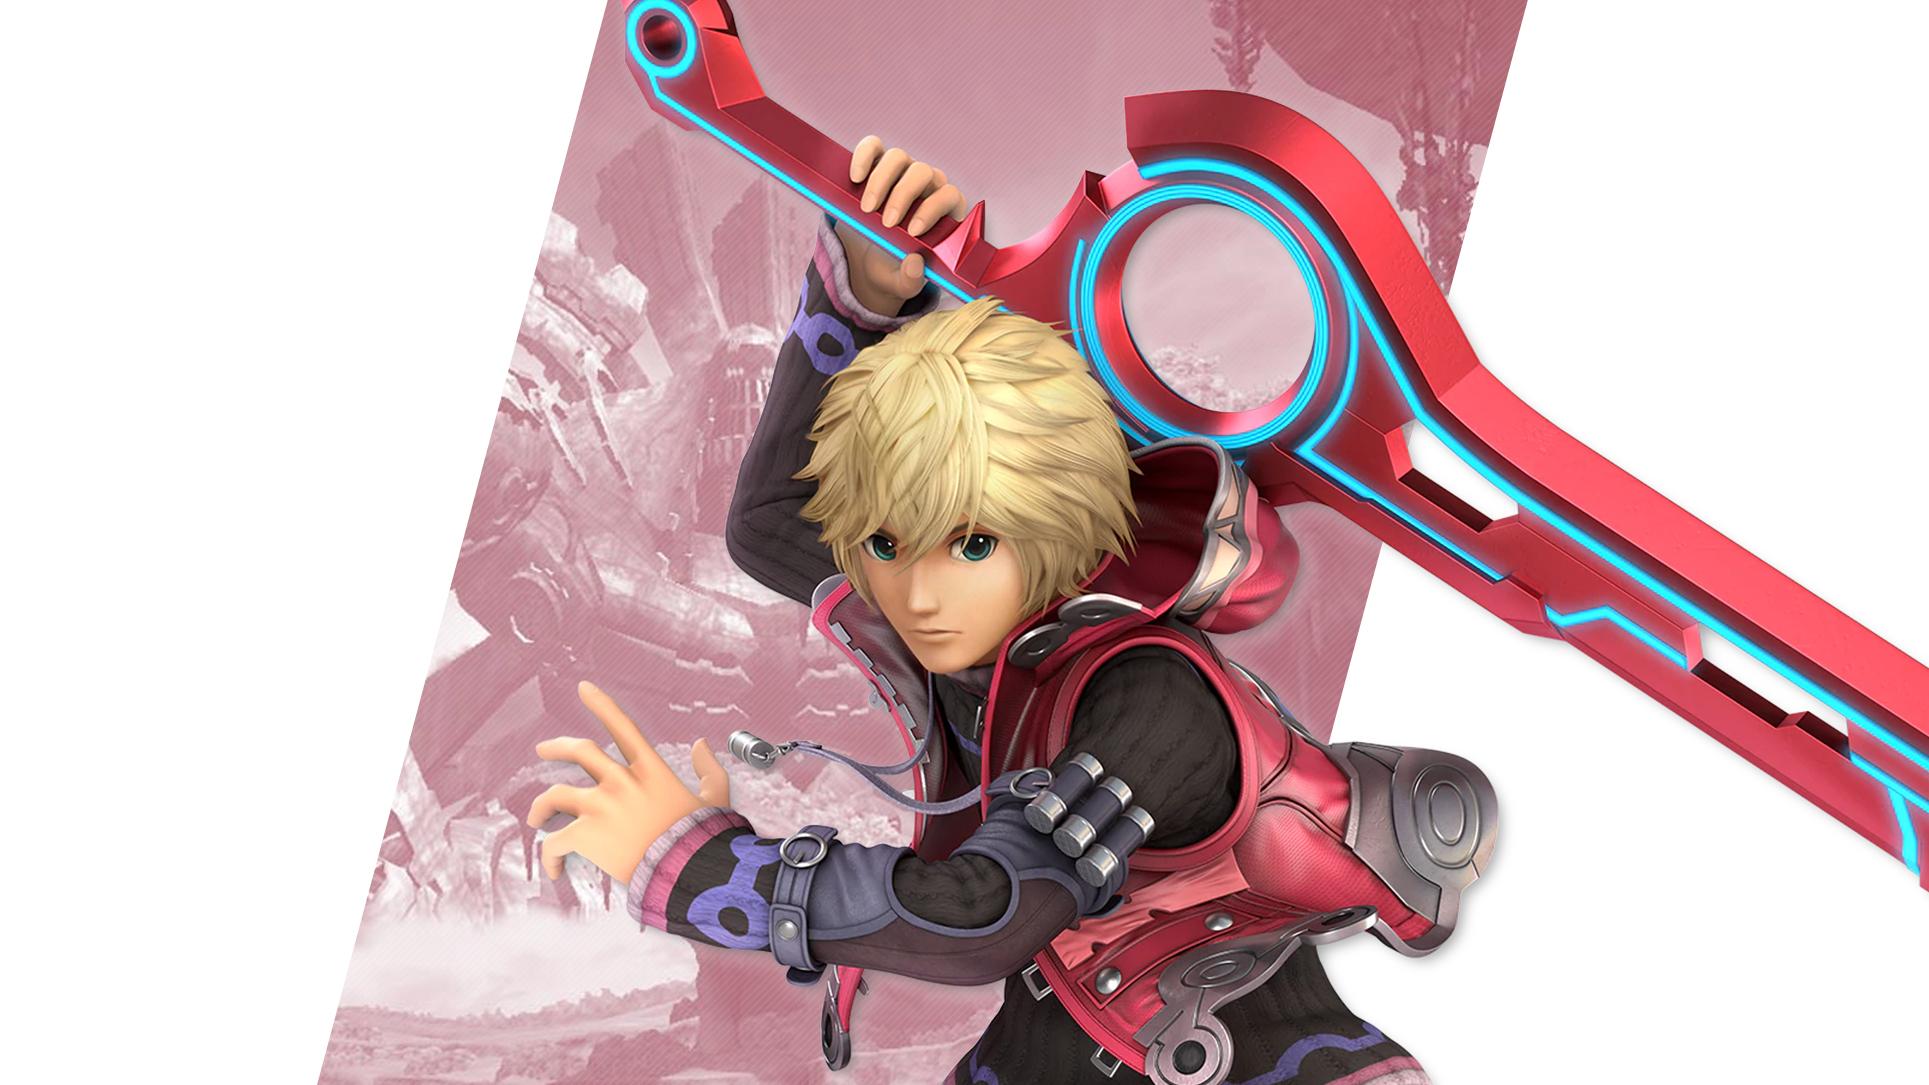 Shulk And Fiora Blades Join The Fight In Xenoblade Chronicles 2 Challenge  Battle Mode | RPG Site